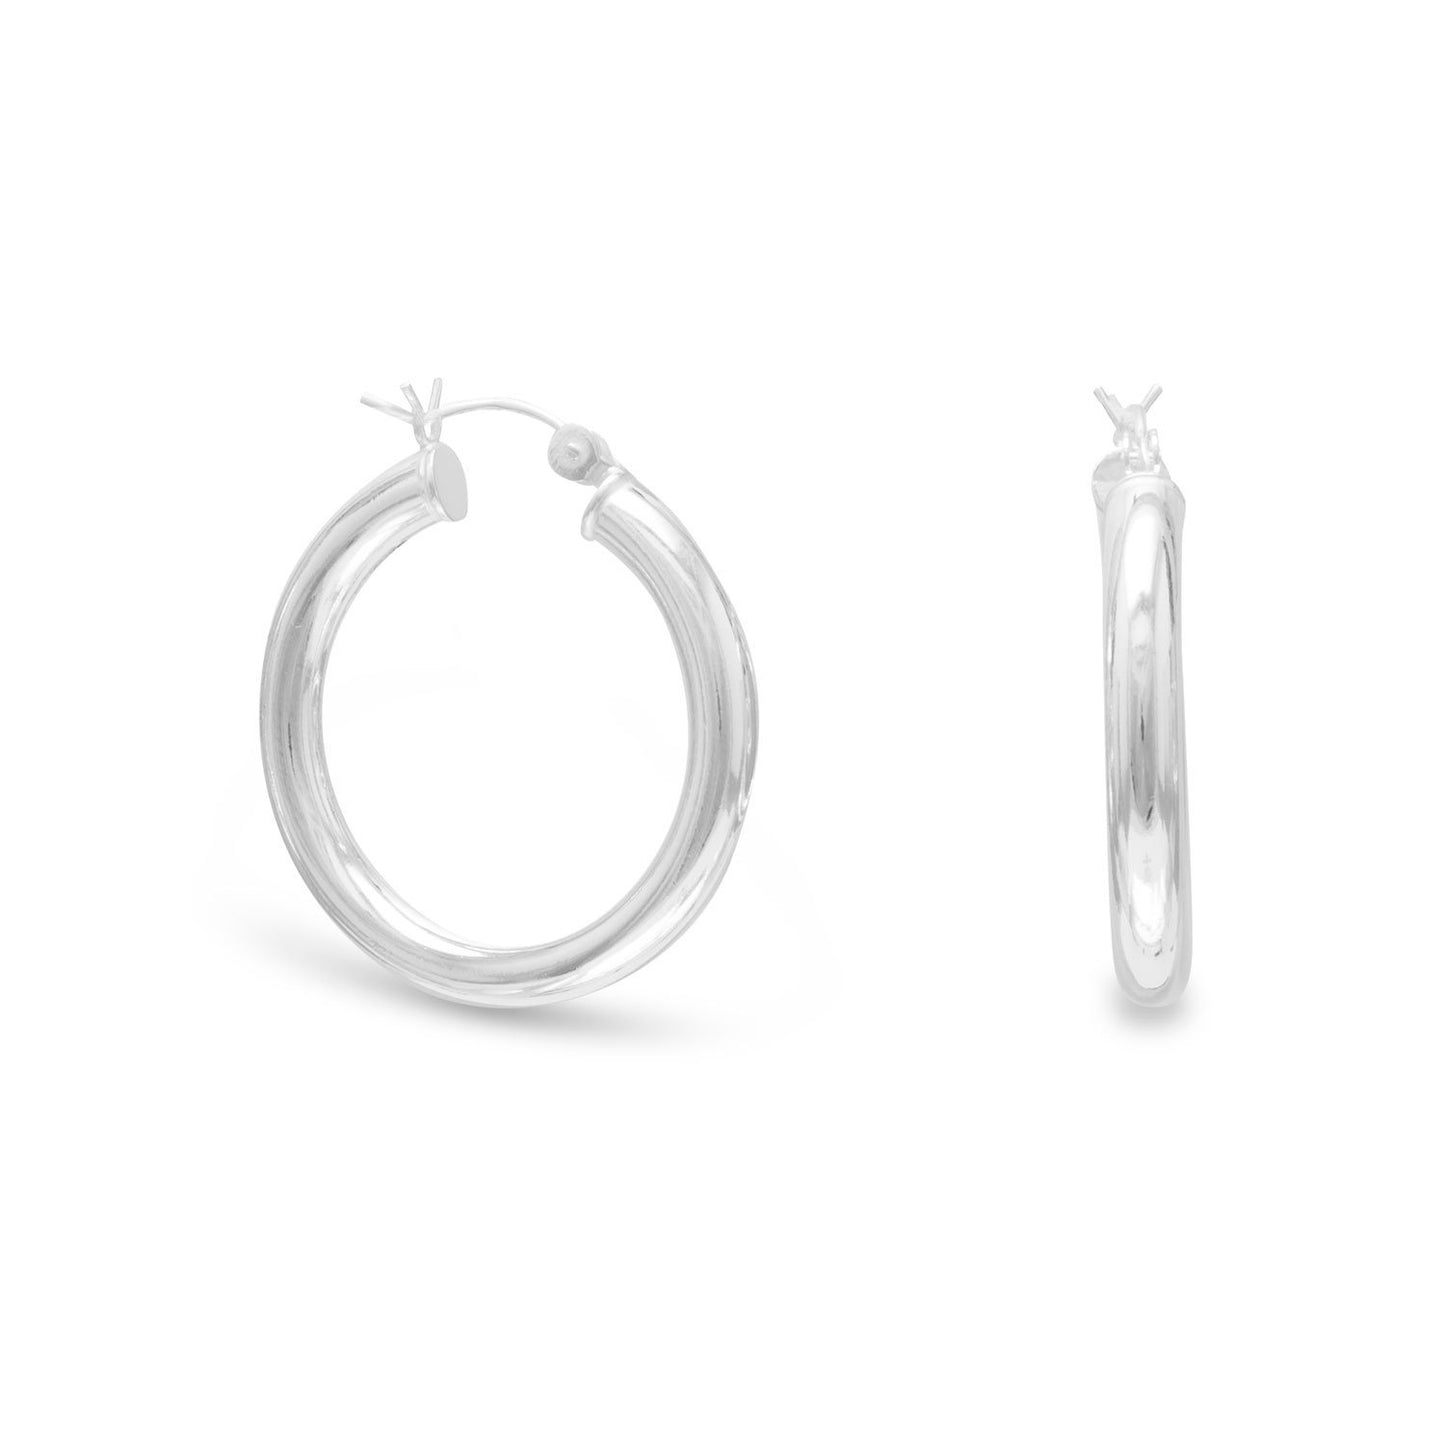 4mm x 28mm Hoop Earrings with Click